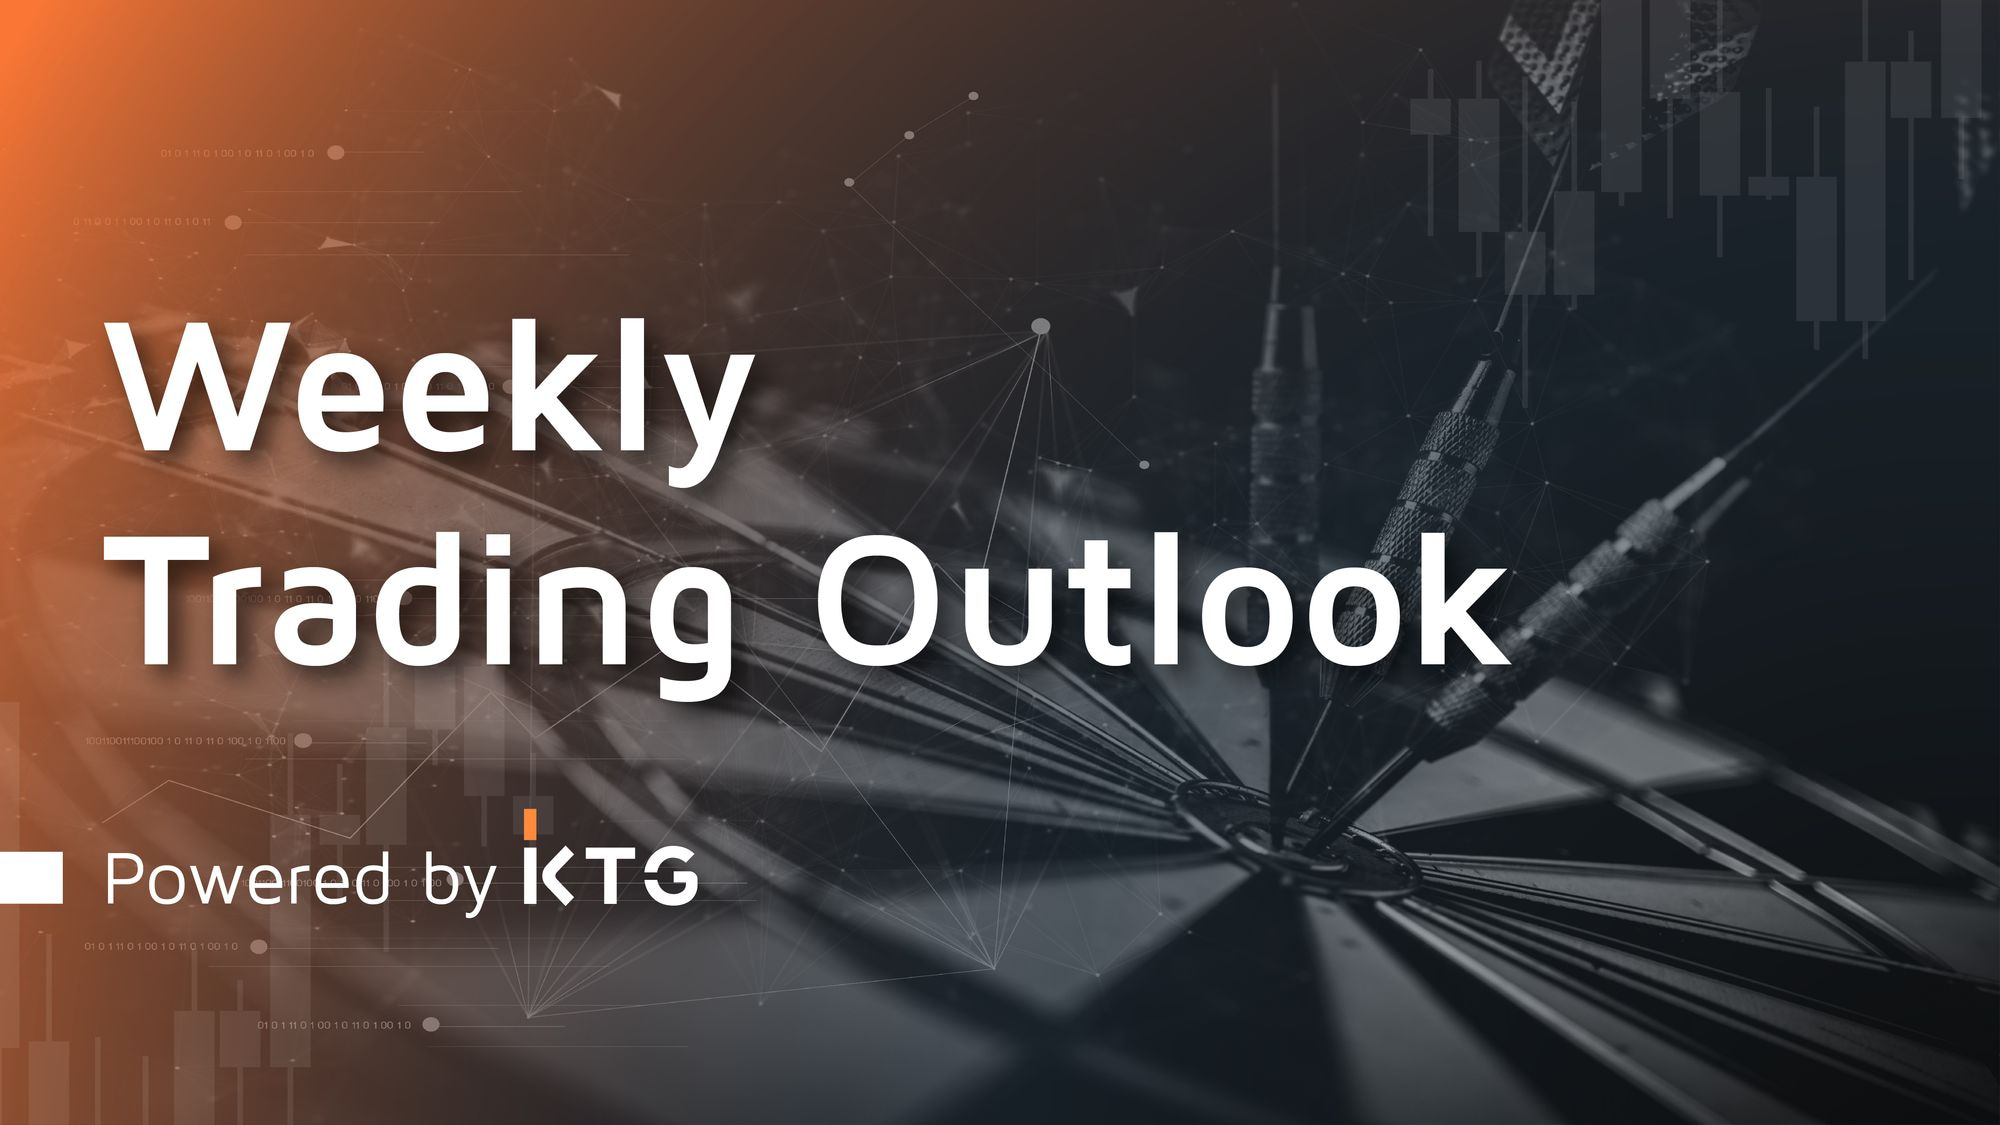 An illiquid market leads to sharp moves. - #TradingOutlook Powered by KTG